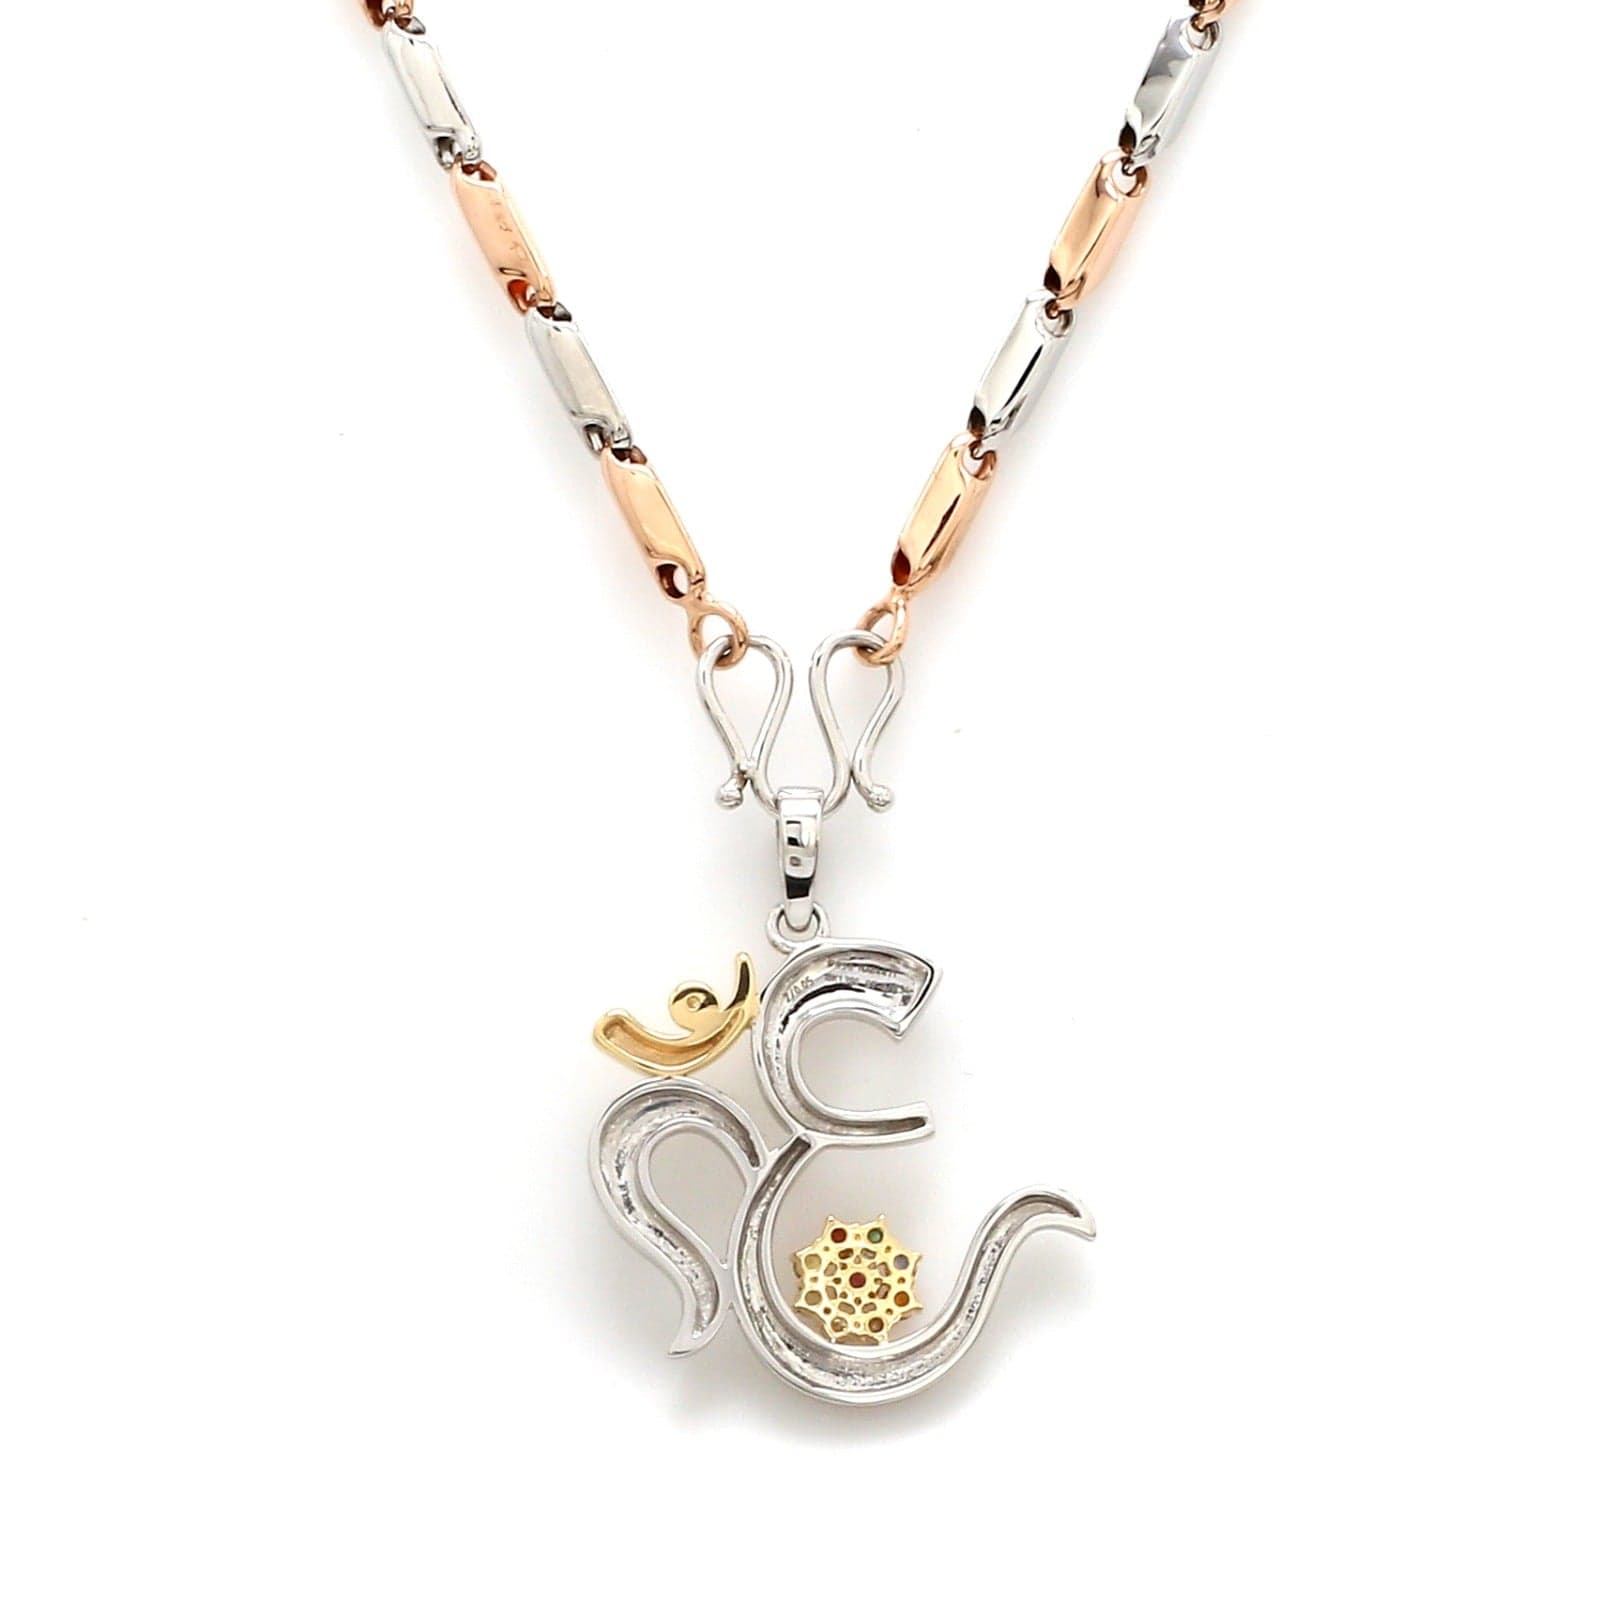 Buy the Rose Gold Deity Spirit Pendant with Chain - Silberry